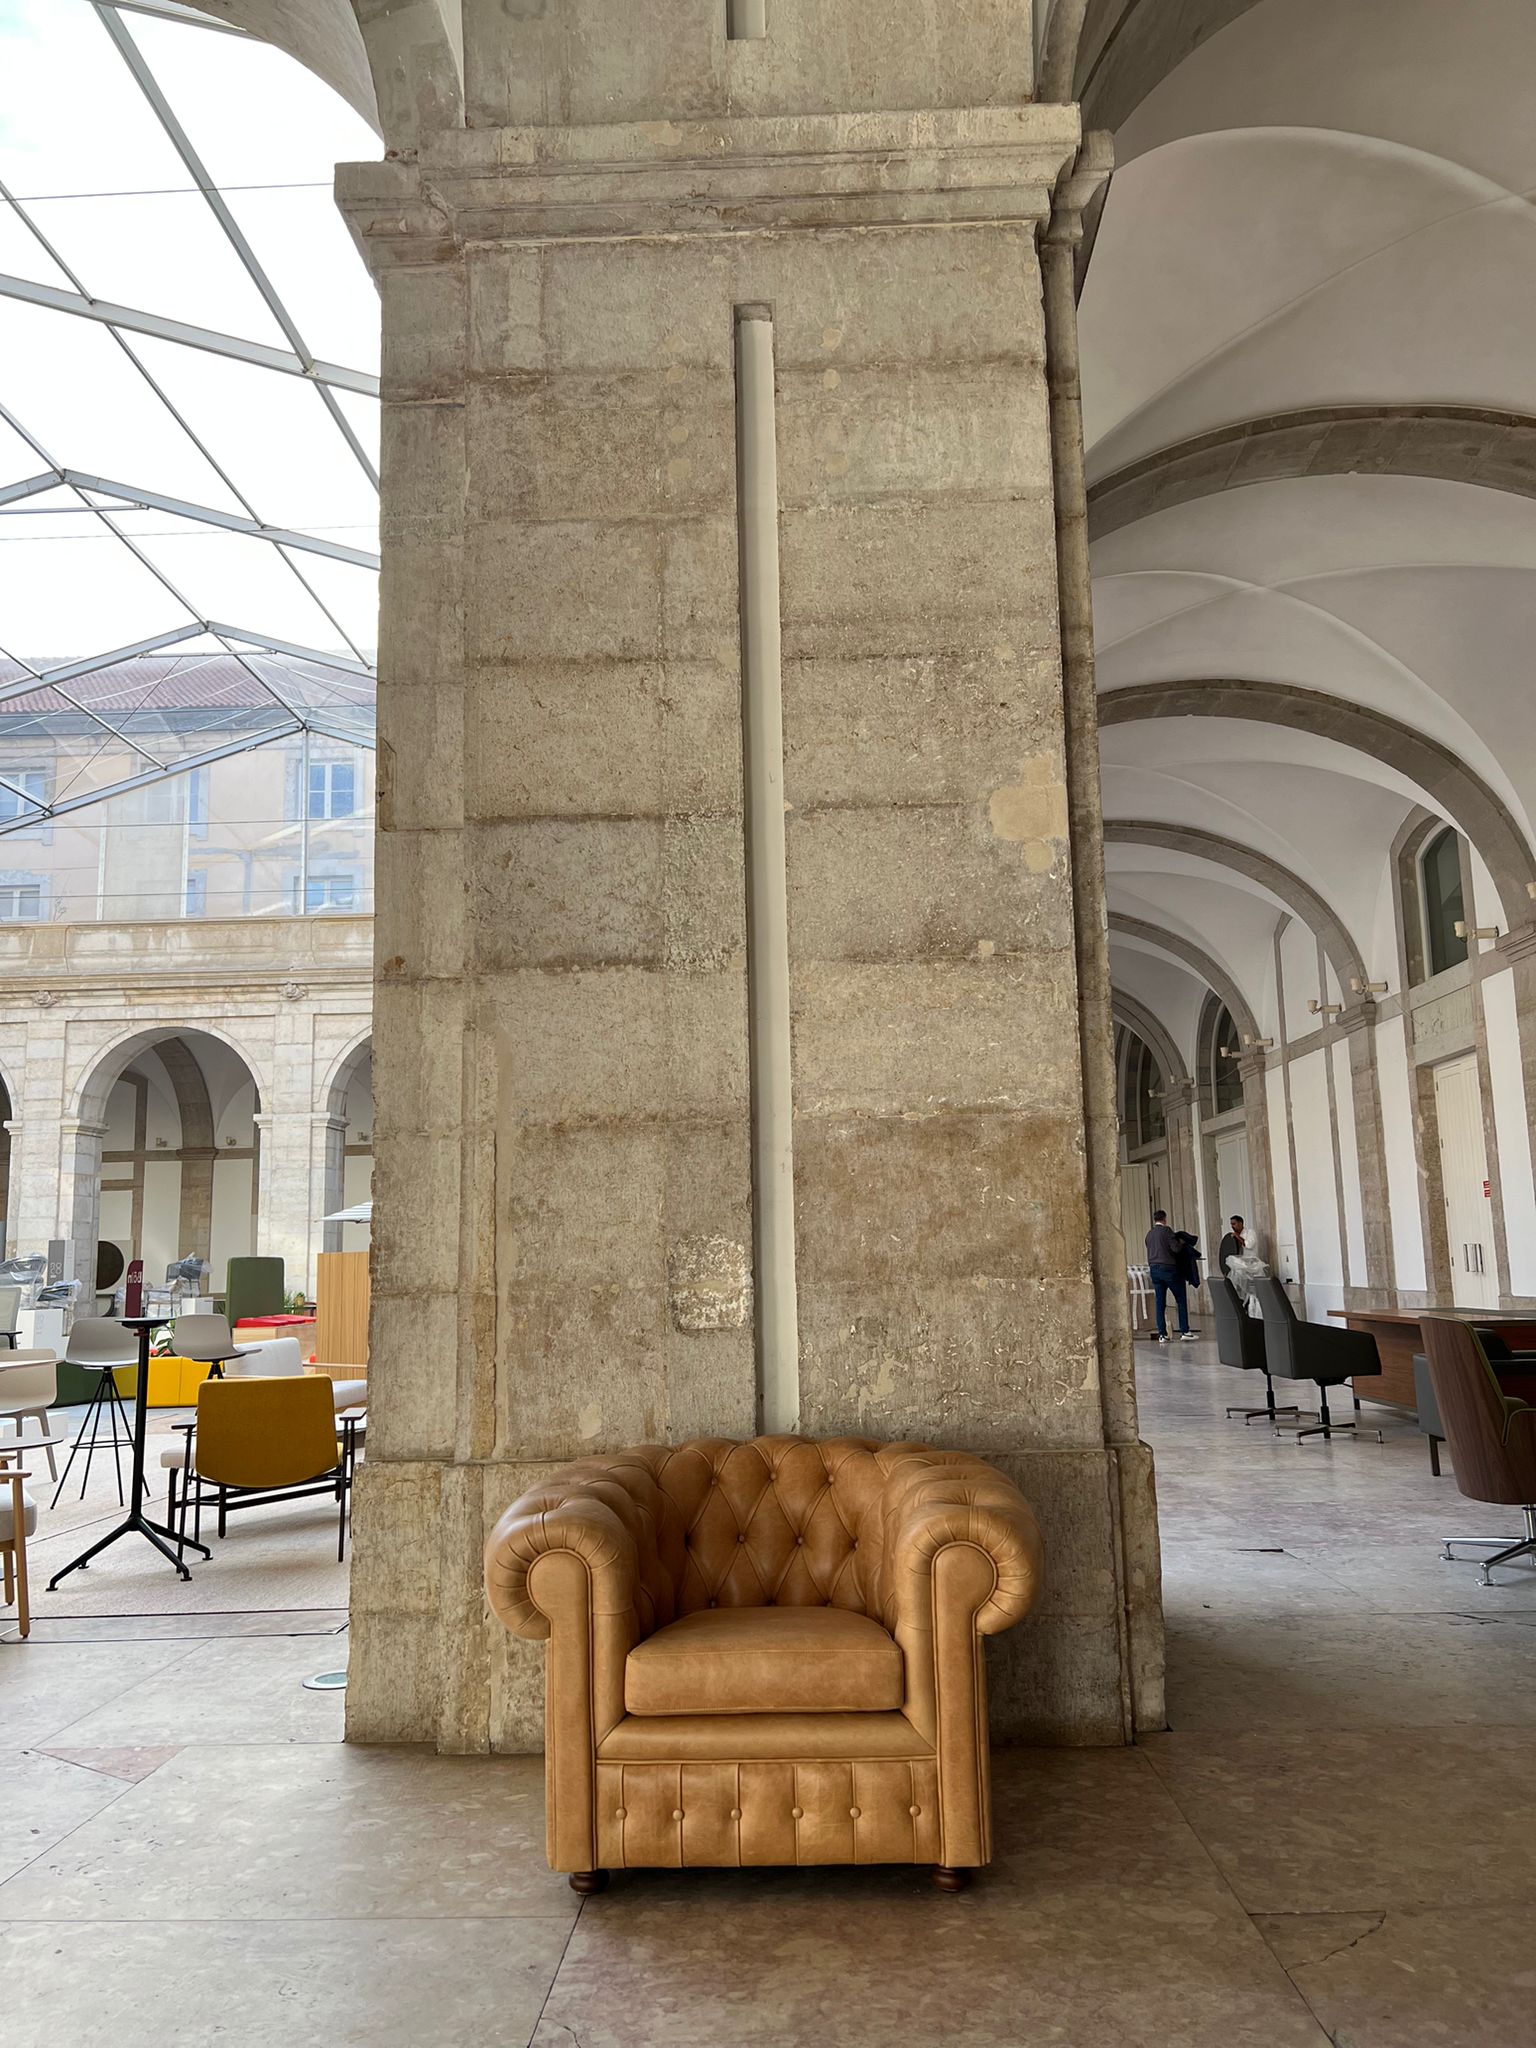 Image of an armchair under a pillar at a furniture exhibition